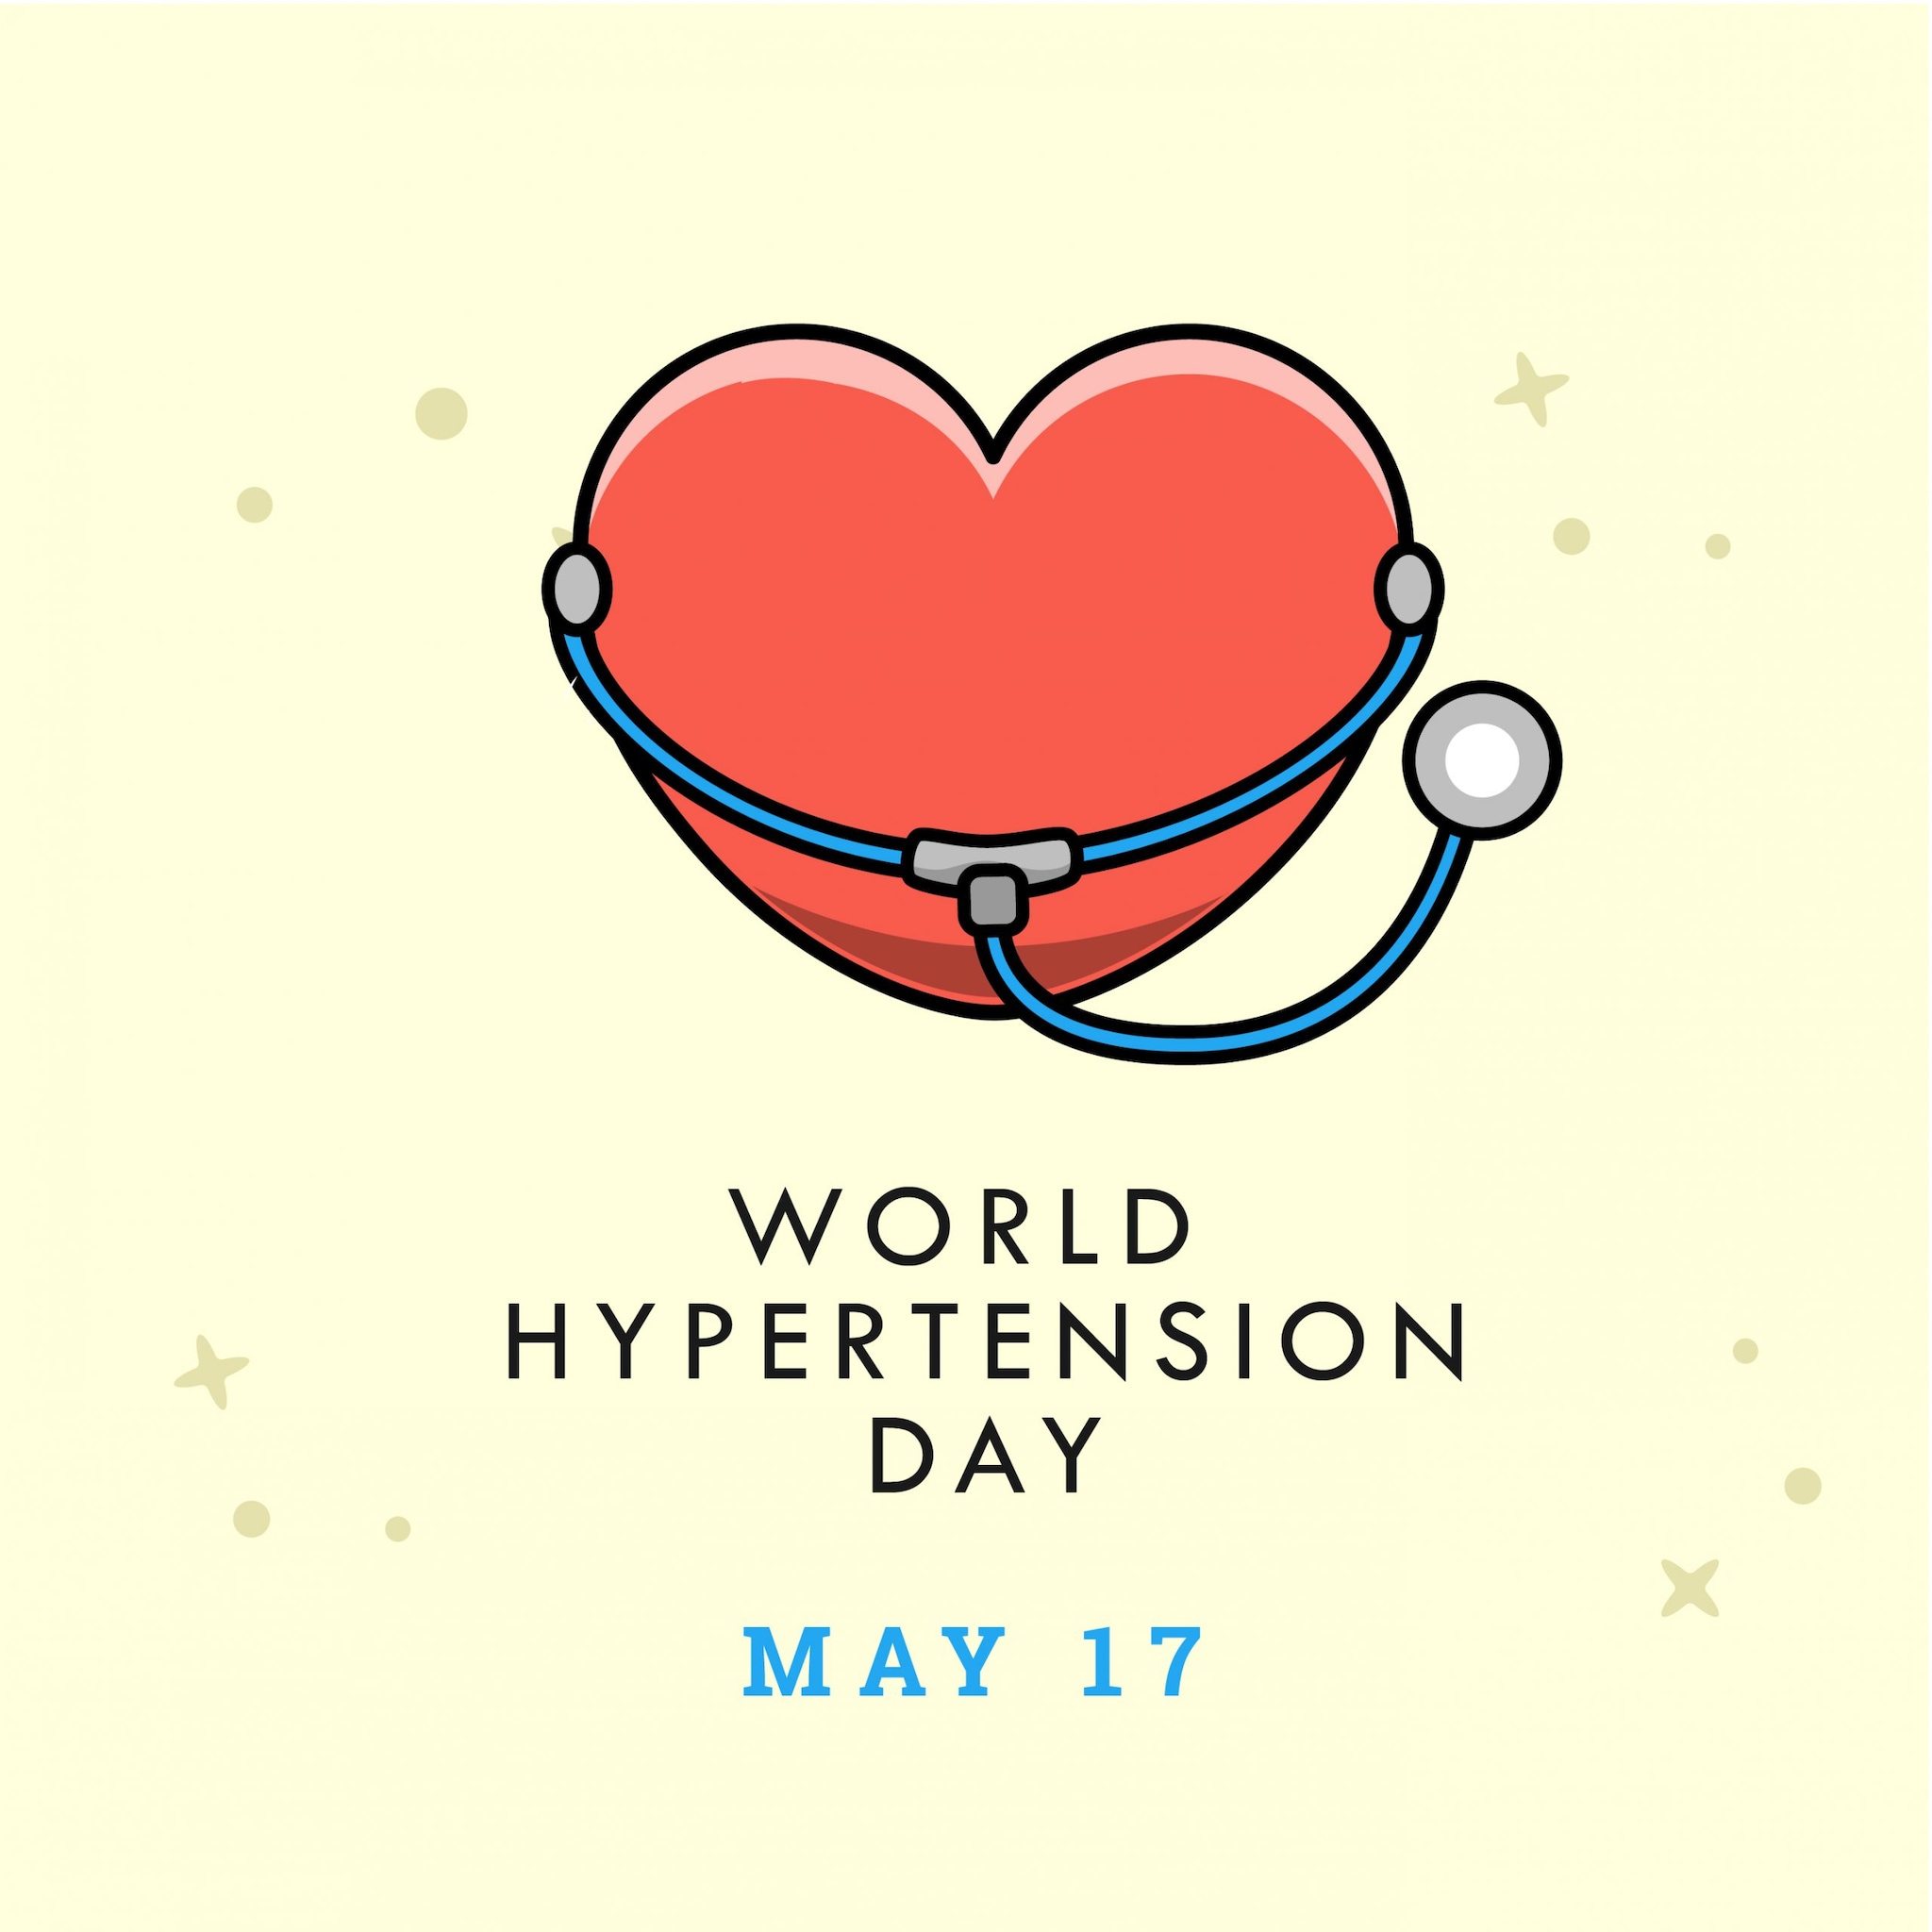 World Hypertension Day May 17 Division of Global Health Protection